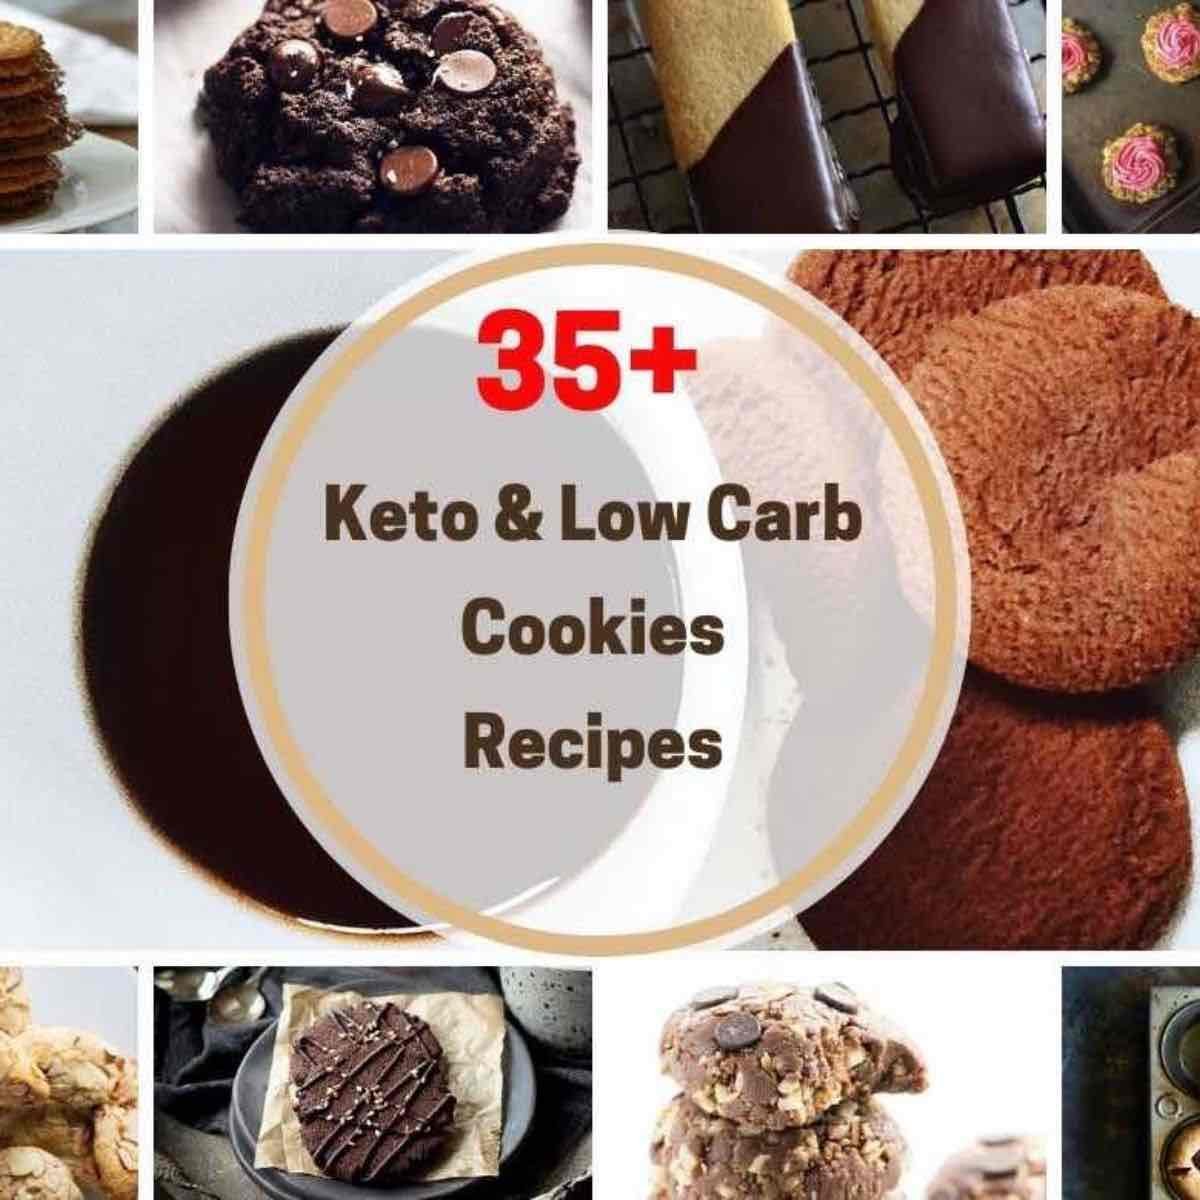 42+ Top Keto Cookie Recipes Collections